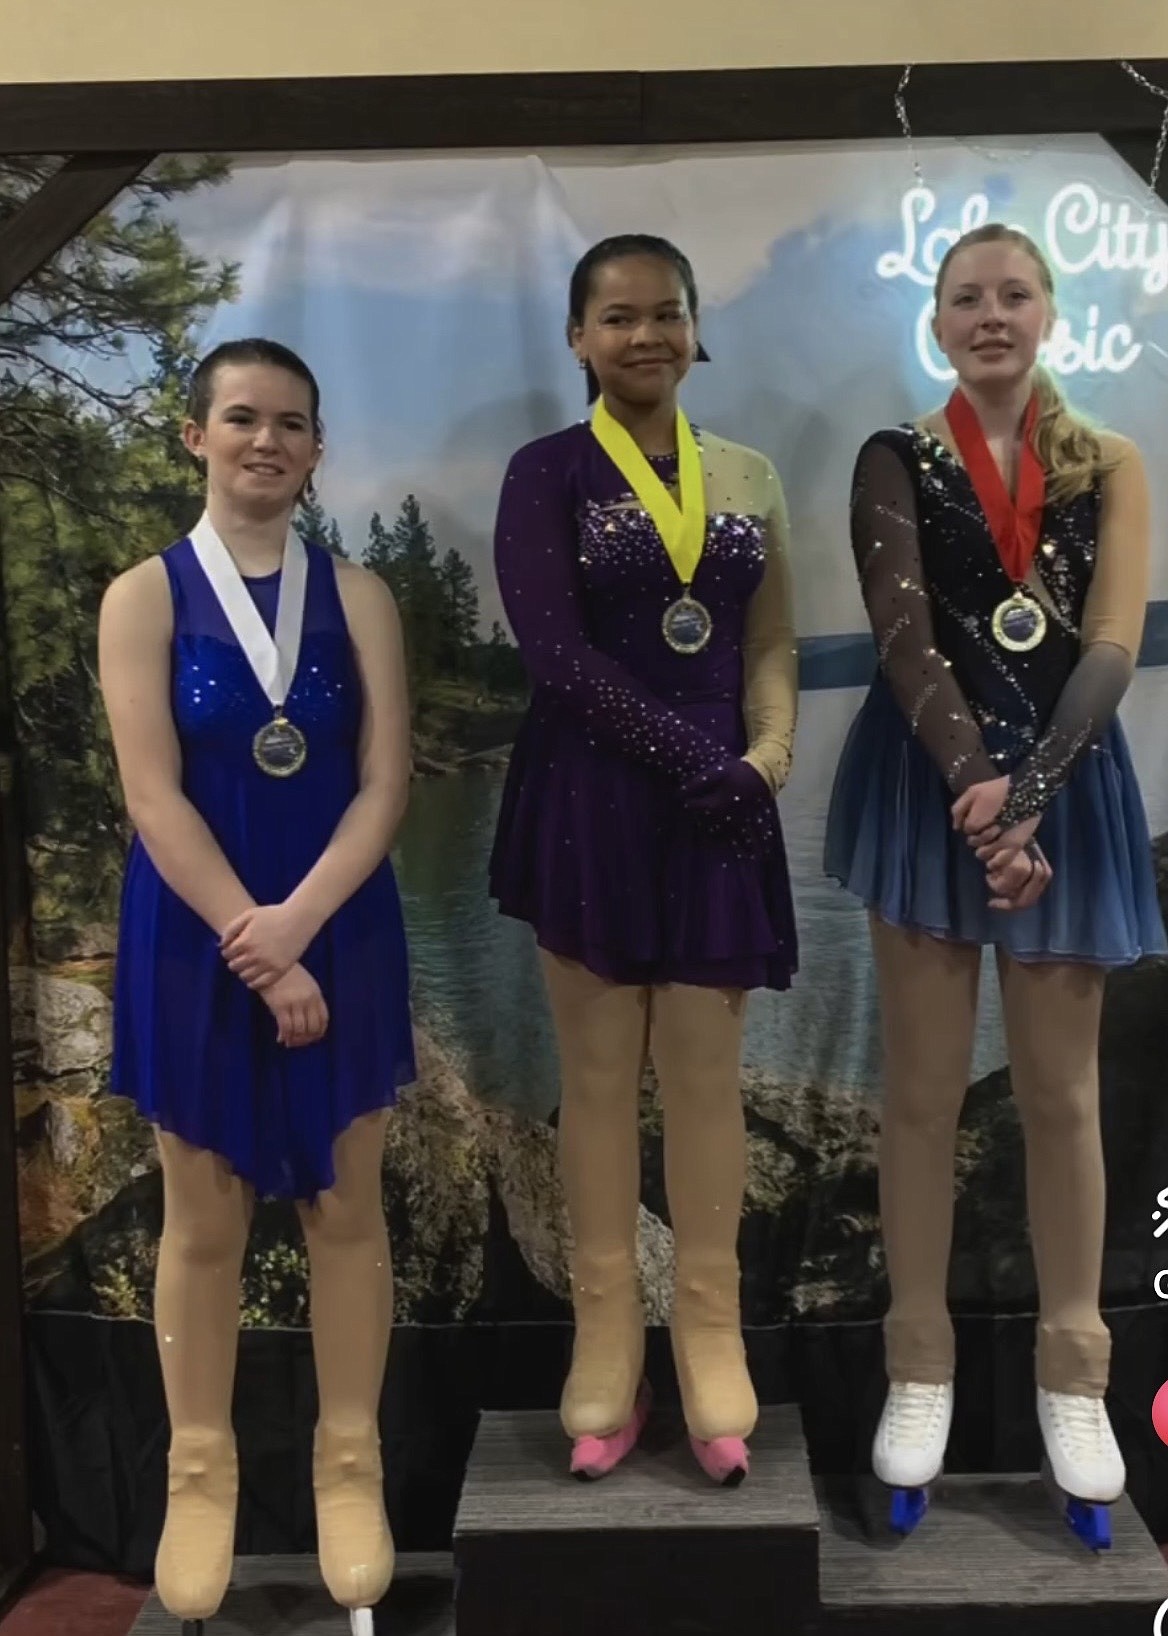 Courtesy photo 
From left, Texas Fallquist, Riley Martinez and Eva Schuler, part of the Lake City Figure Skating program of the Spokane Figure Skating Club, which hosted the Lake City Classic on May 17-19 at the Frontier Ice Arena in Coeur d'Alene.